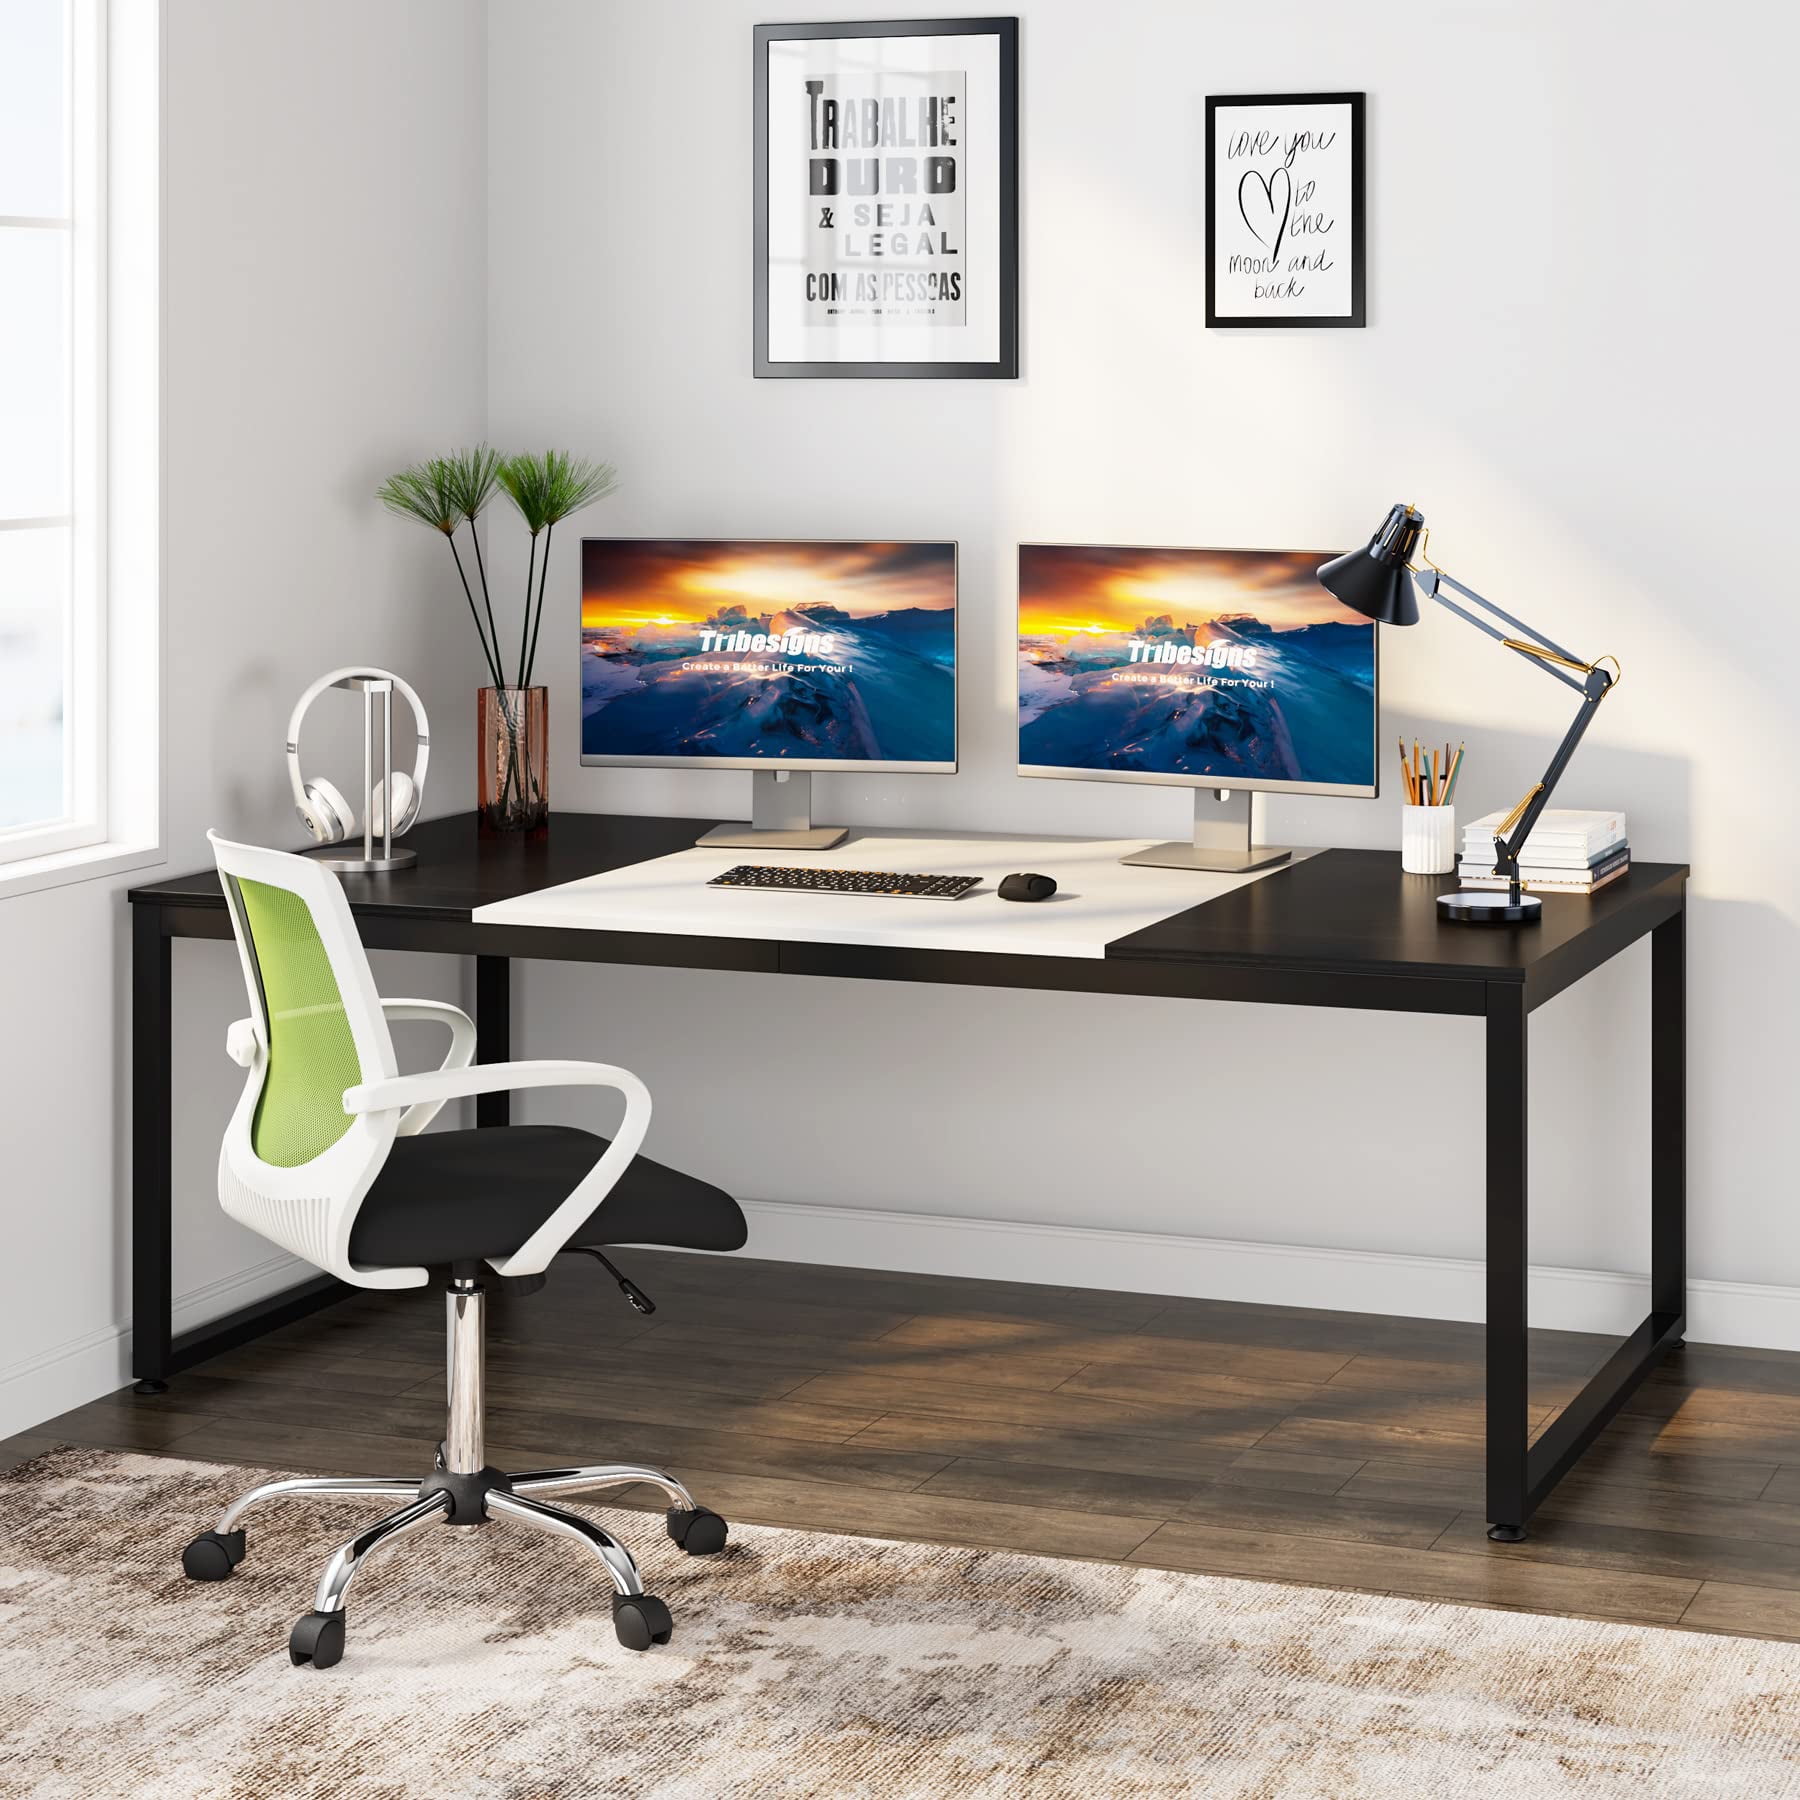 70 Executive Desk, Computer Desk Home Office Table for Study